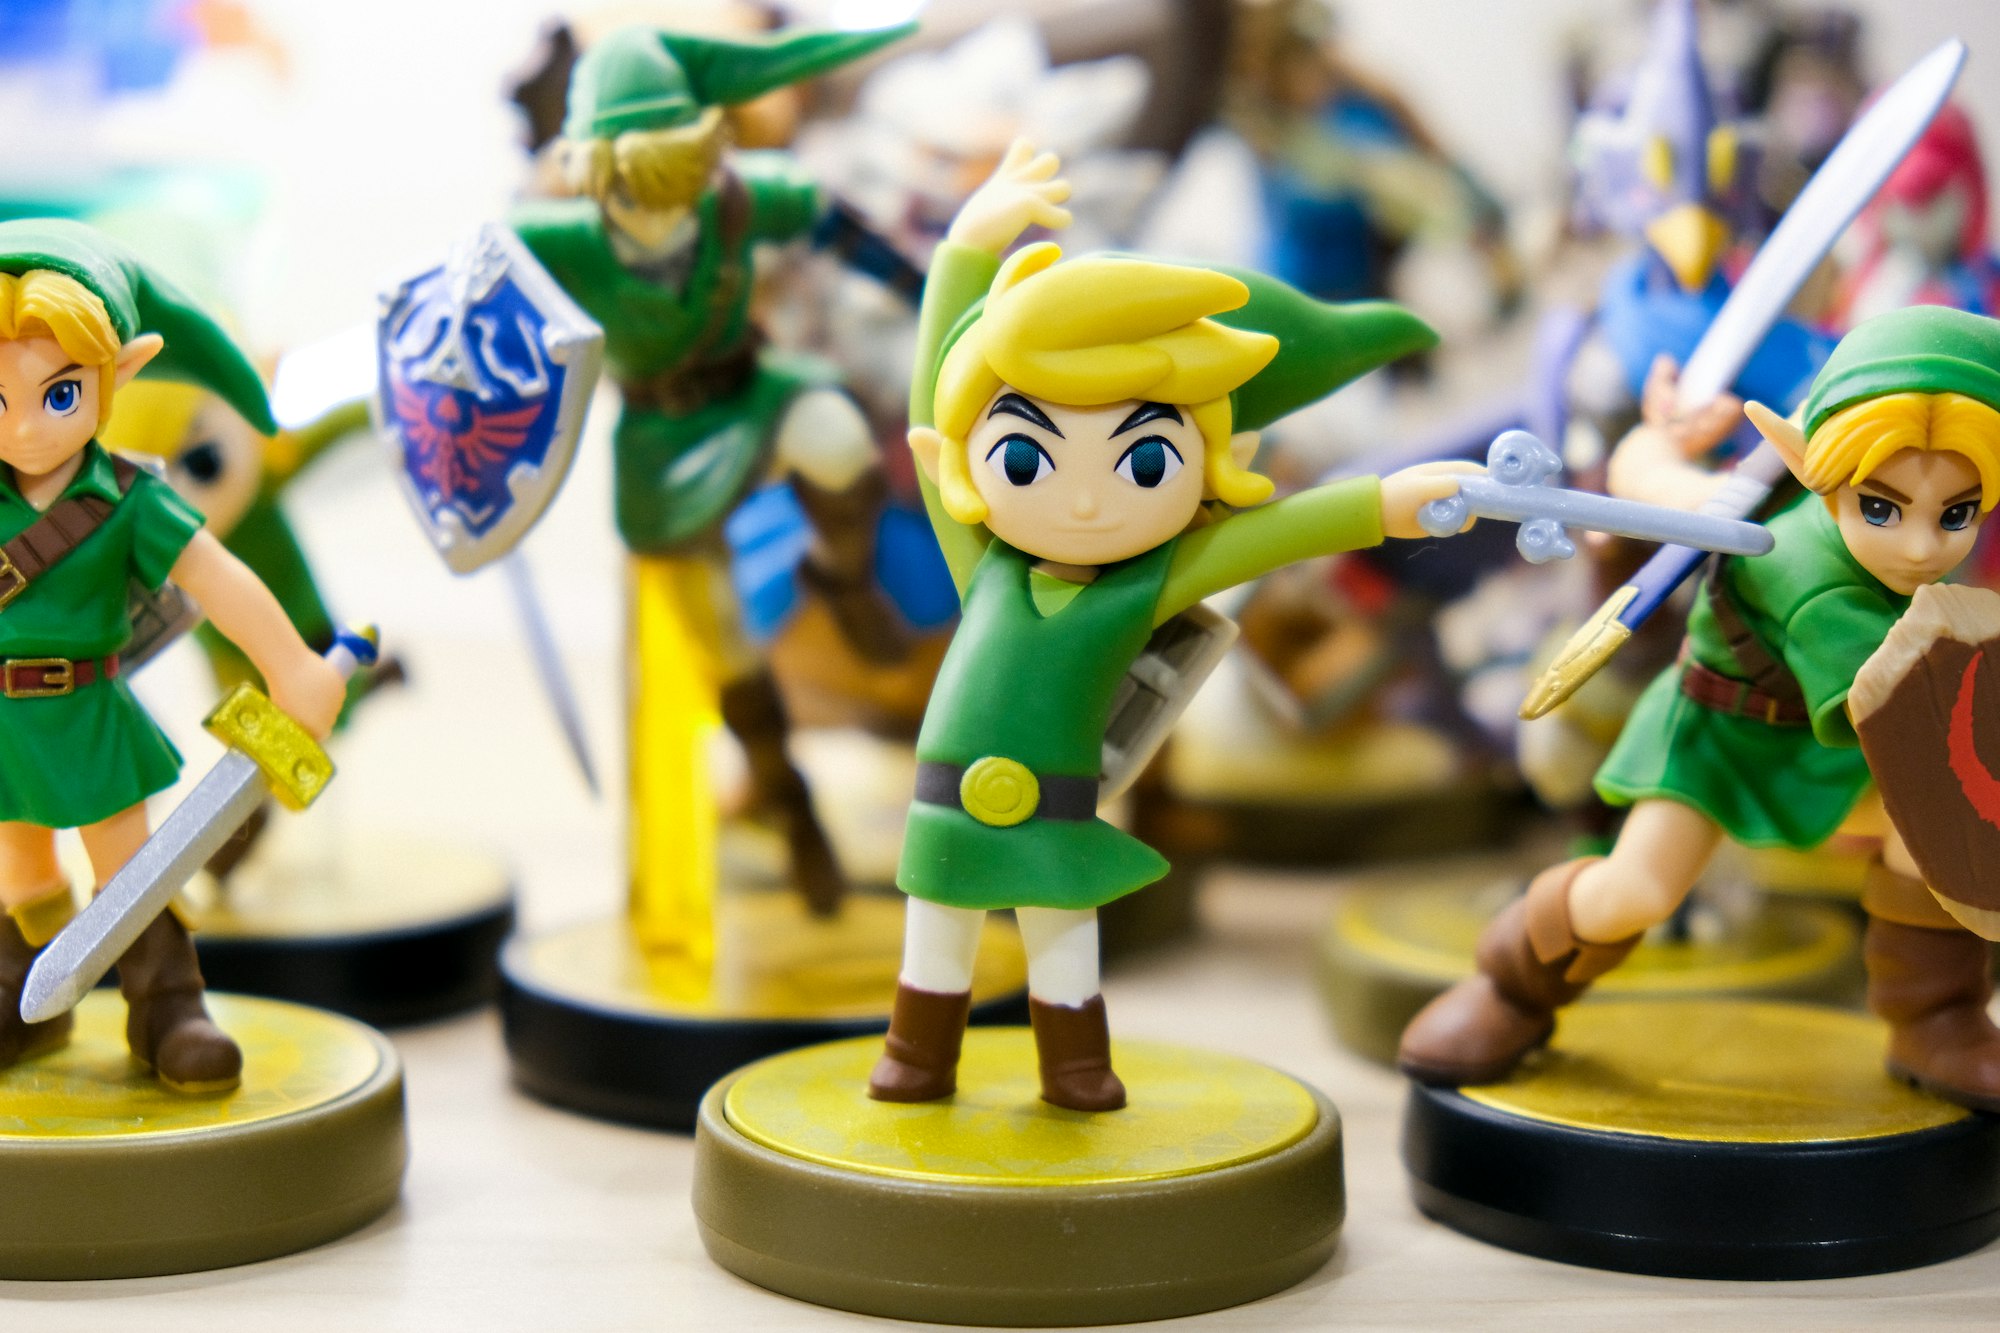 Backing Up Your Amiibo With A Proxmark3